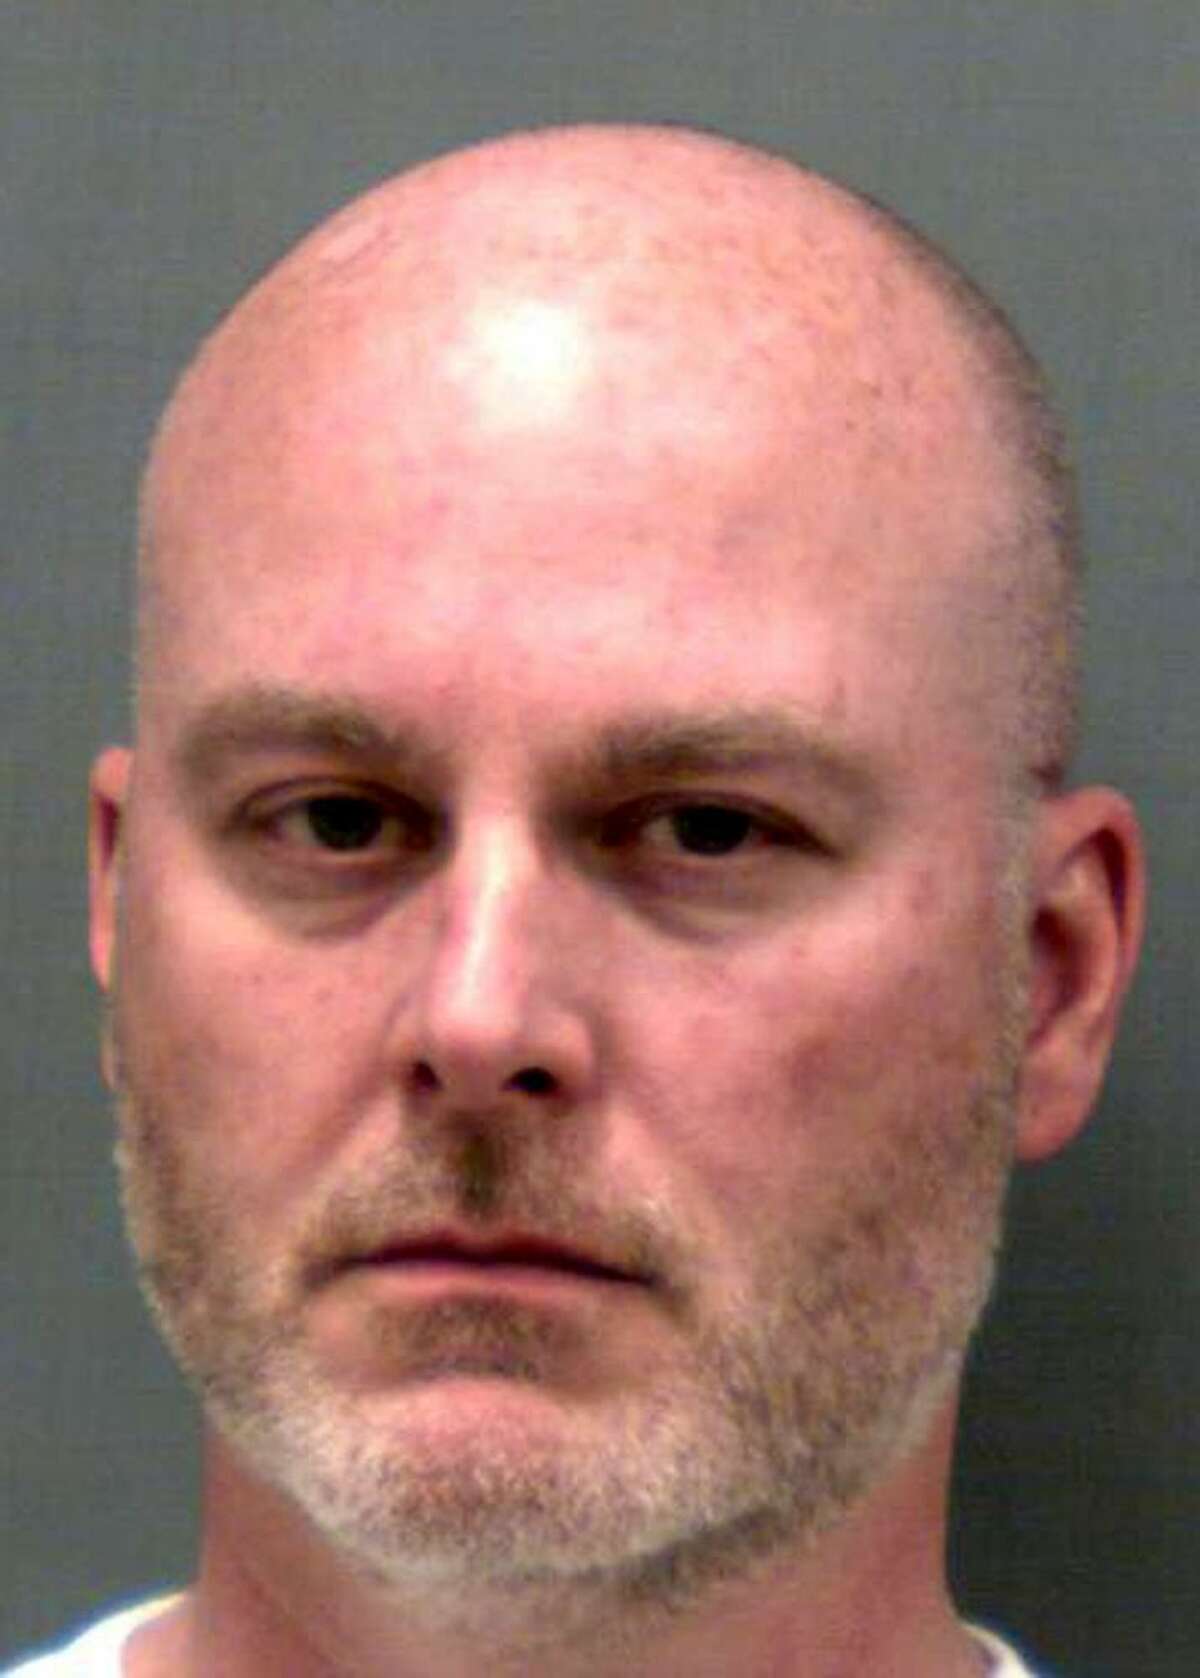 William Ruscoe is shown in this file photo provided by the Connecticut Department of Correction. Ruscoe began a 30-month prison term in January 2015 after pleading guilty to second-degree sexual assault of a 17-year-old girl he met through a program for young people interested in law enforcement.